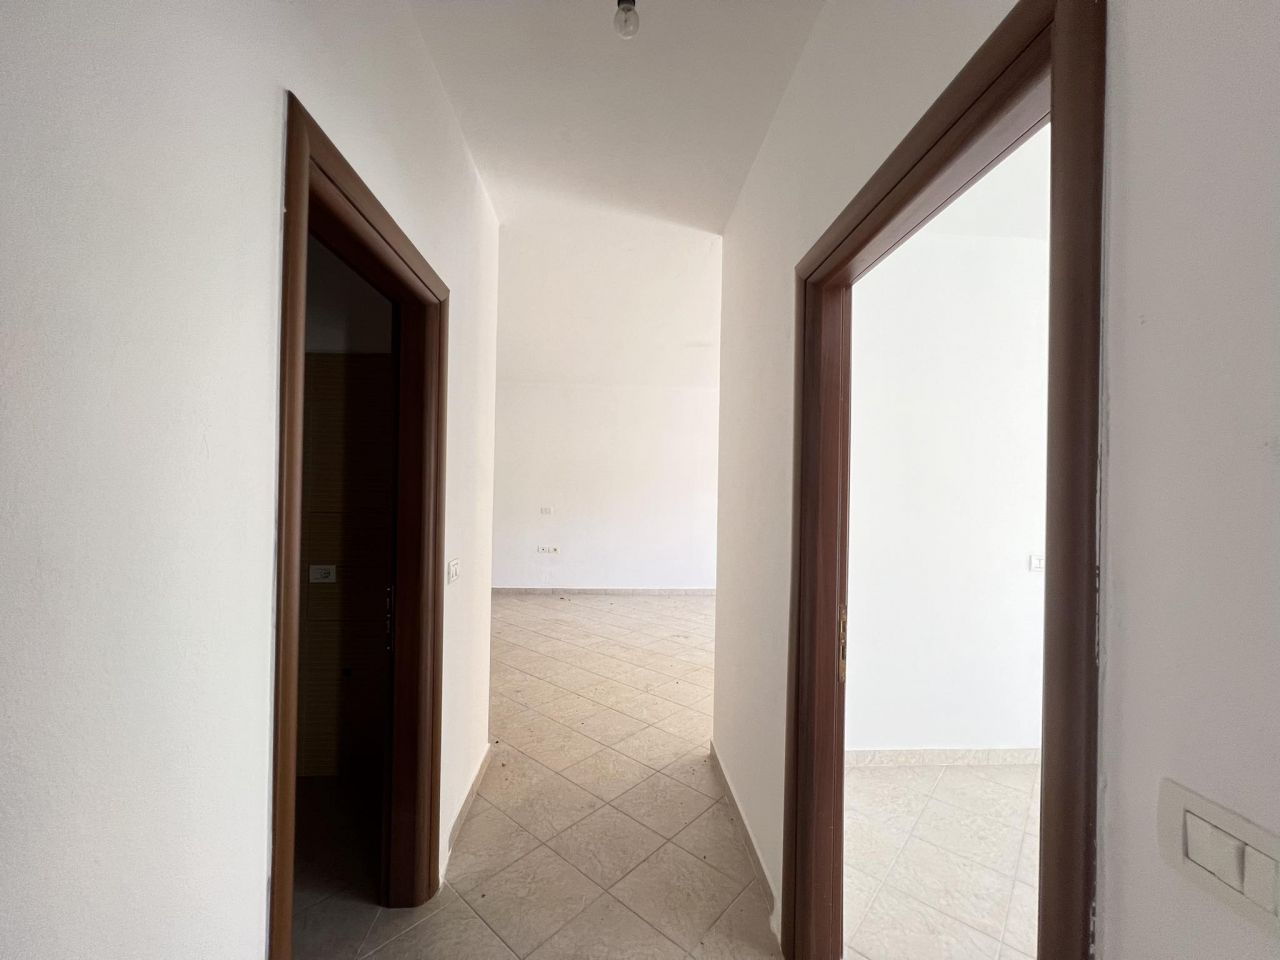 Two Bedroom Two Bathrooms Apartment For Sale In Saranda Albania In Short Distance From The Sea Built in Good Quality